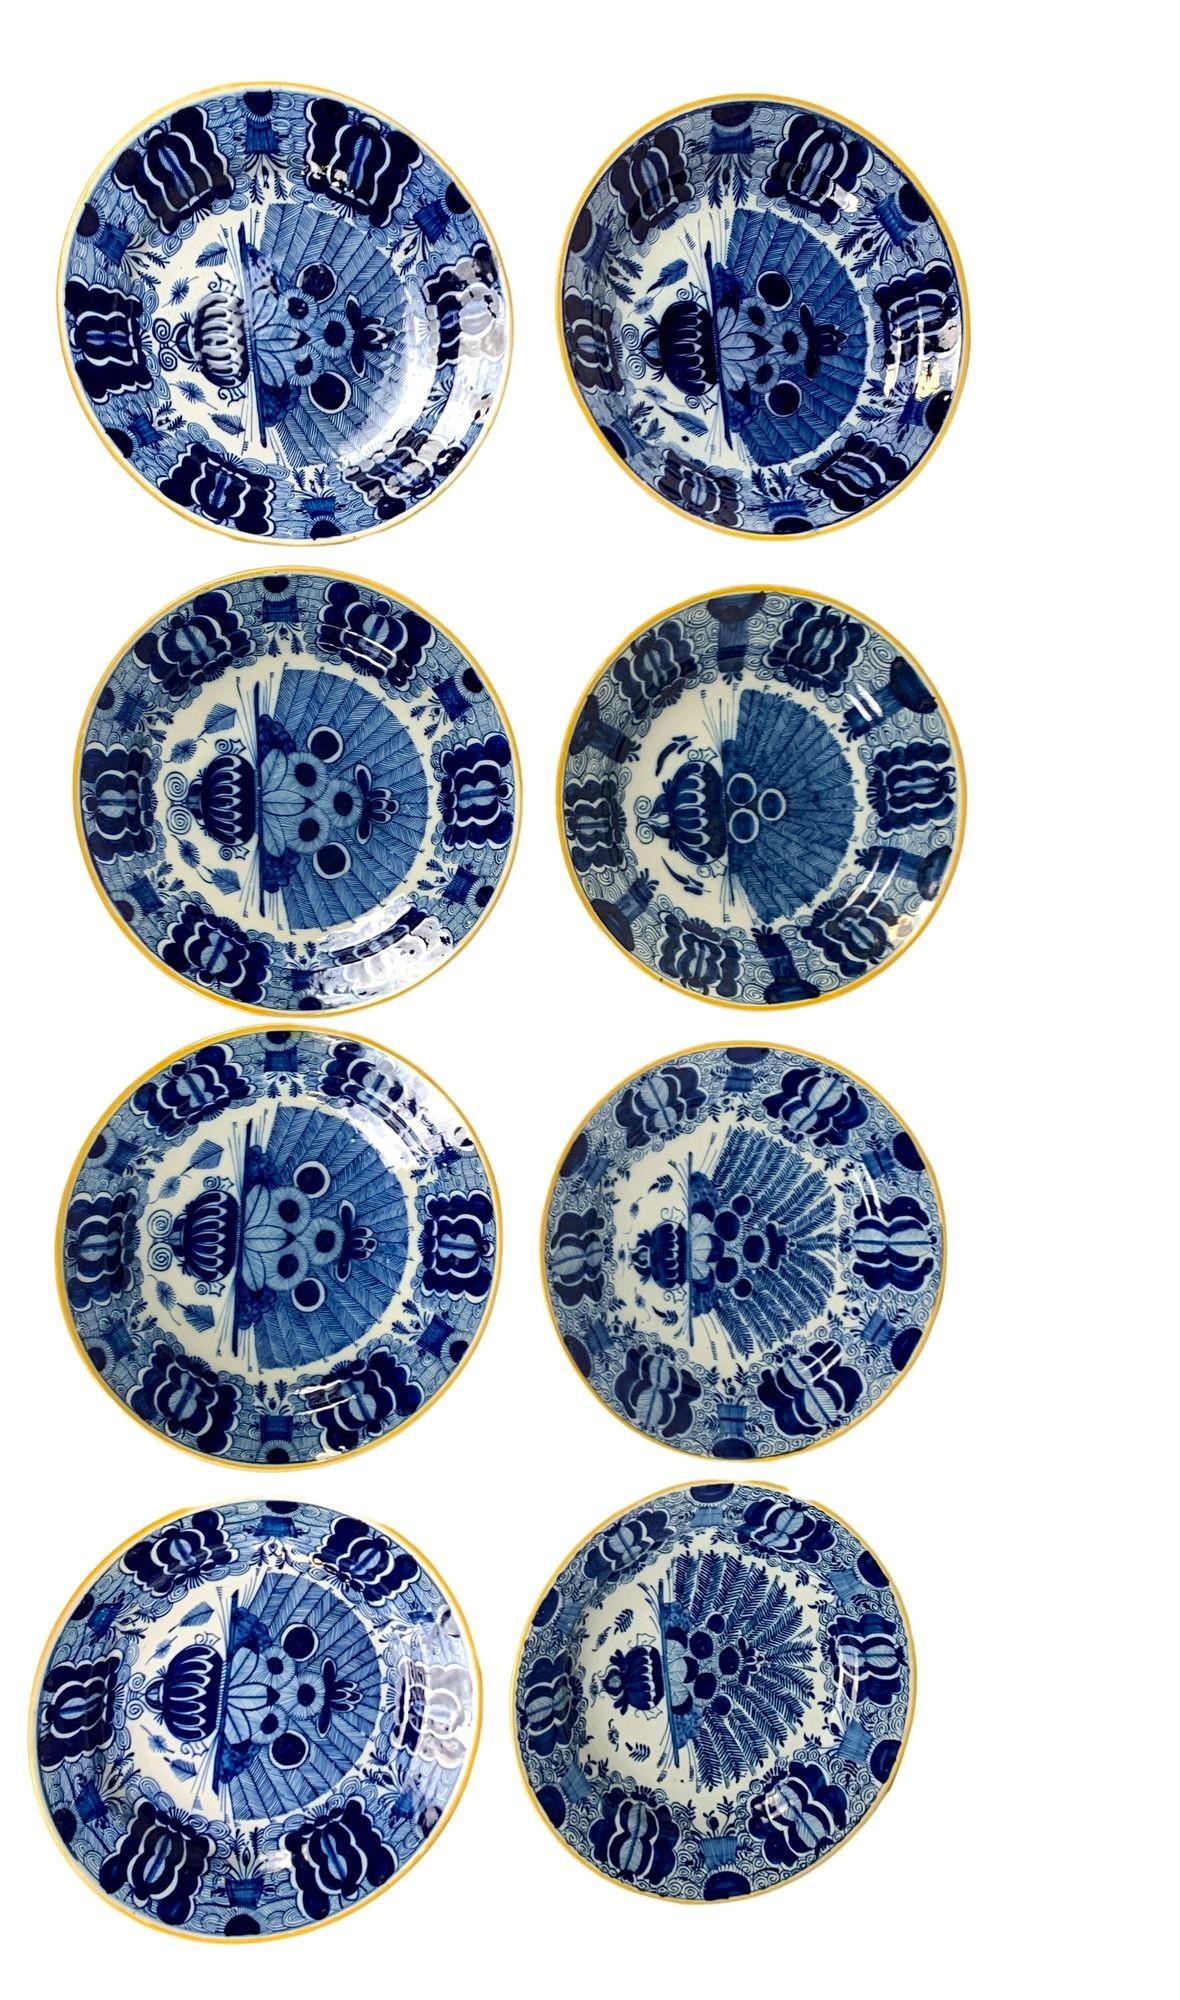 This set of eight blue and white Delft chargers was made at De Vergulde Bloempot and De Klaaw in the Netherlands between 1780 and 1820.
They feature the gorgeous 